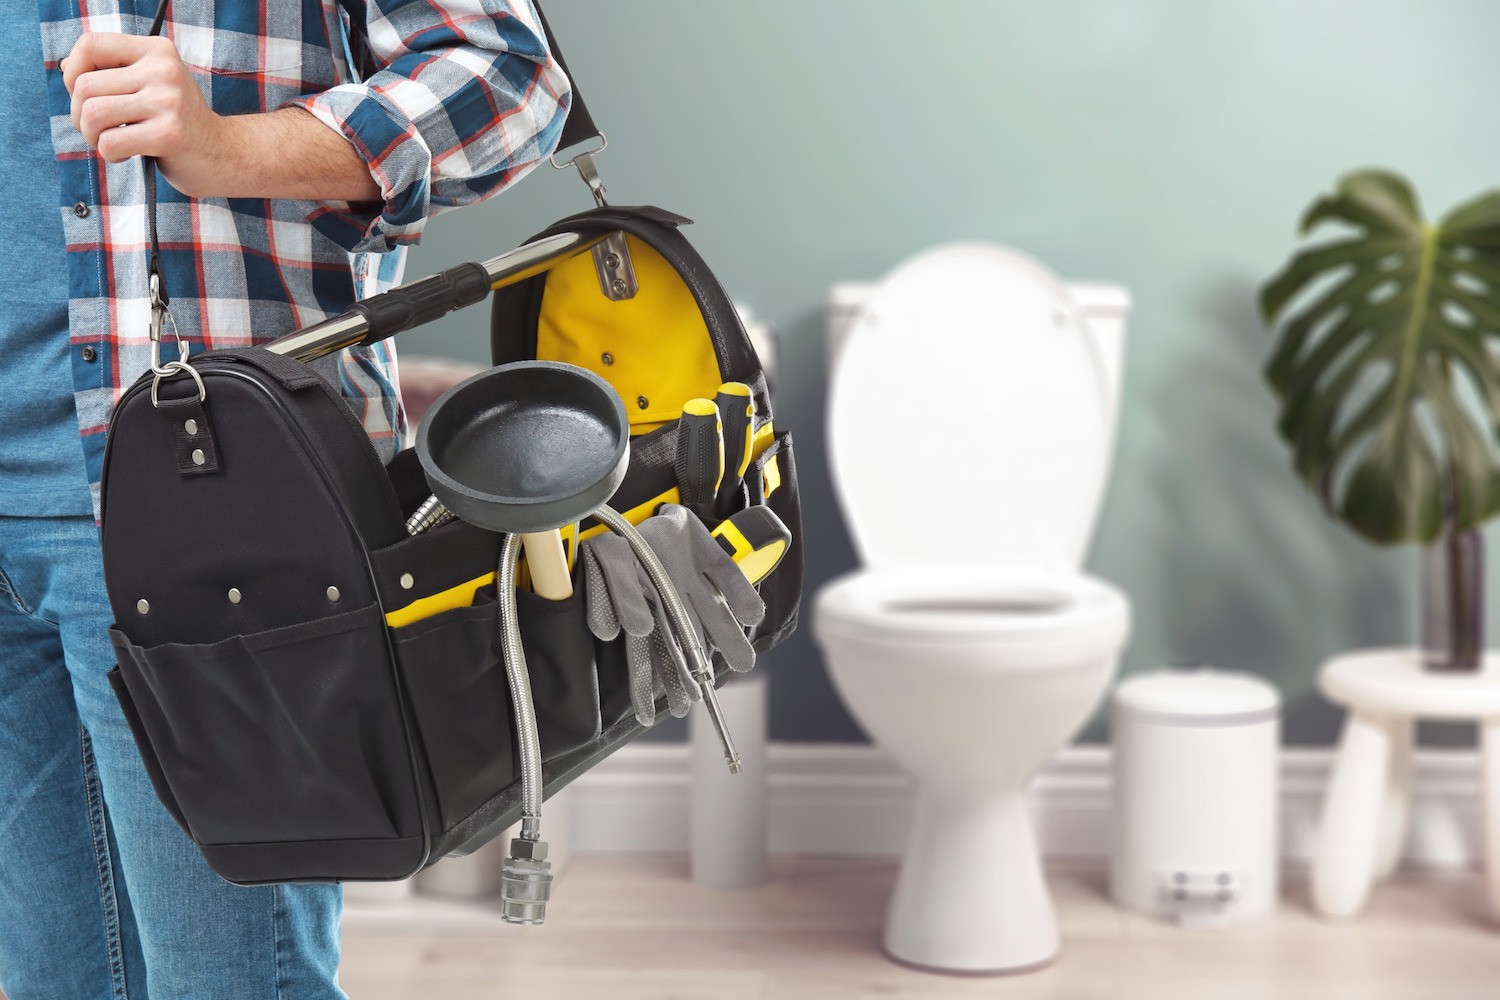 What Do You Do if Your Toilet Overflows?